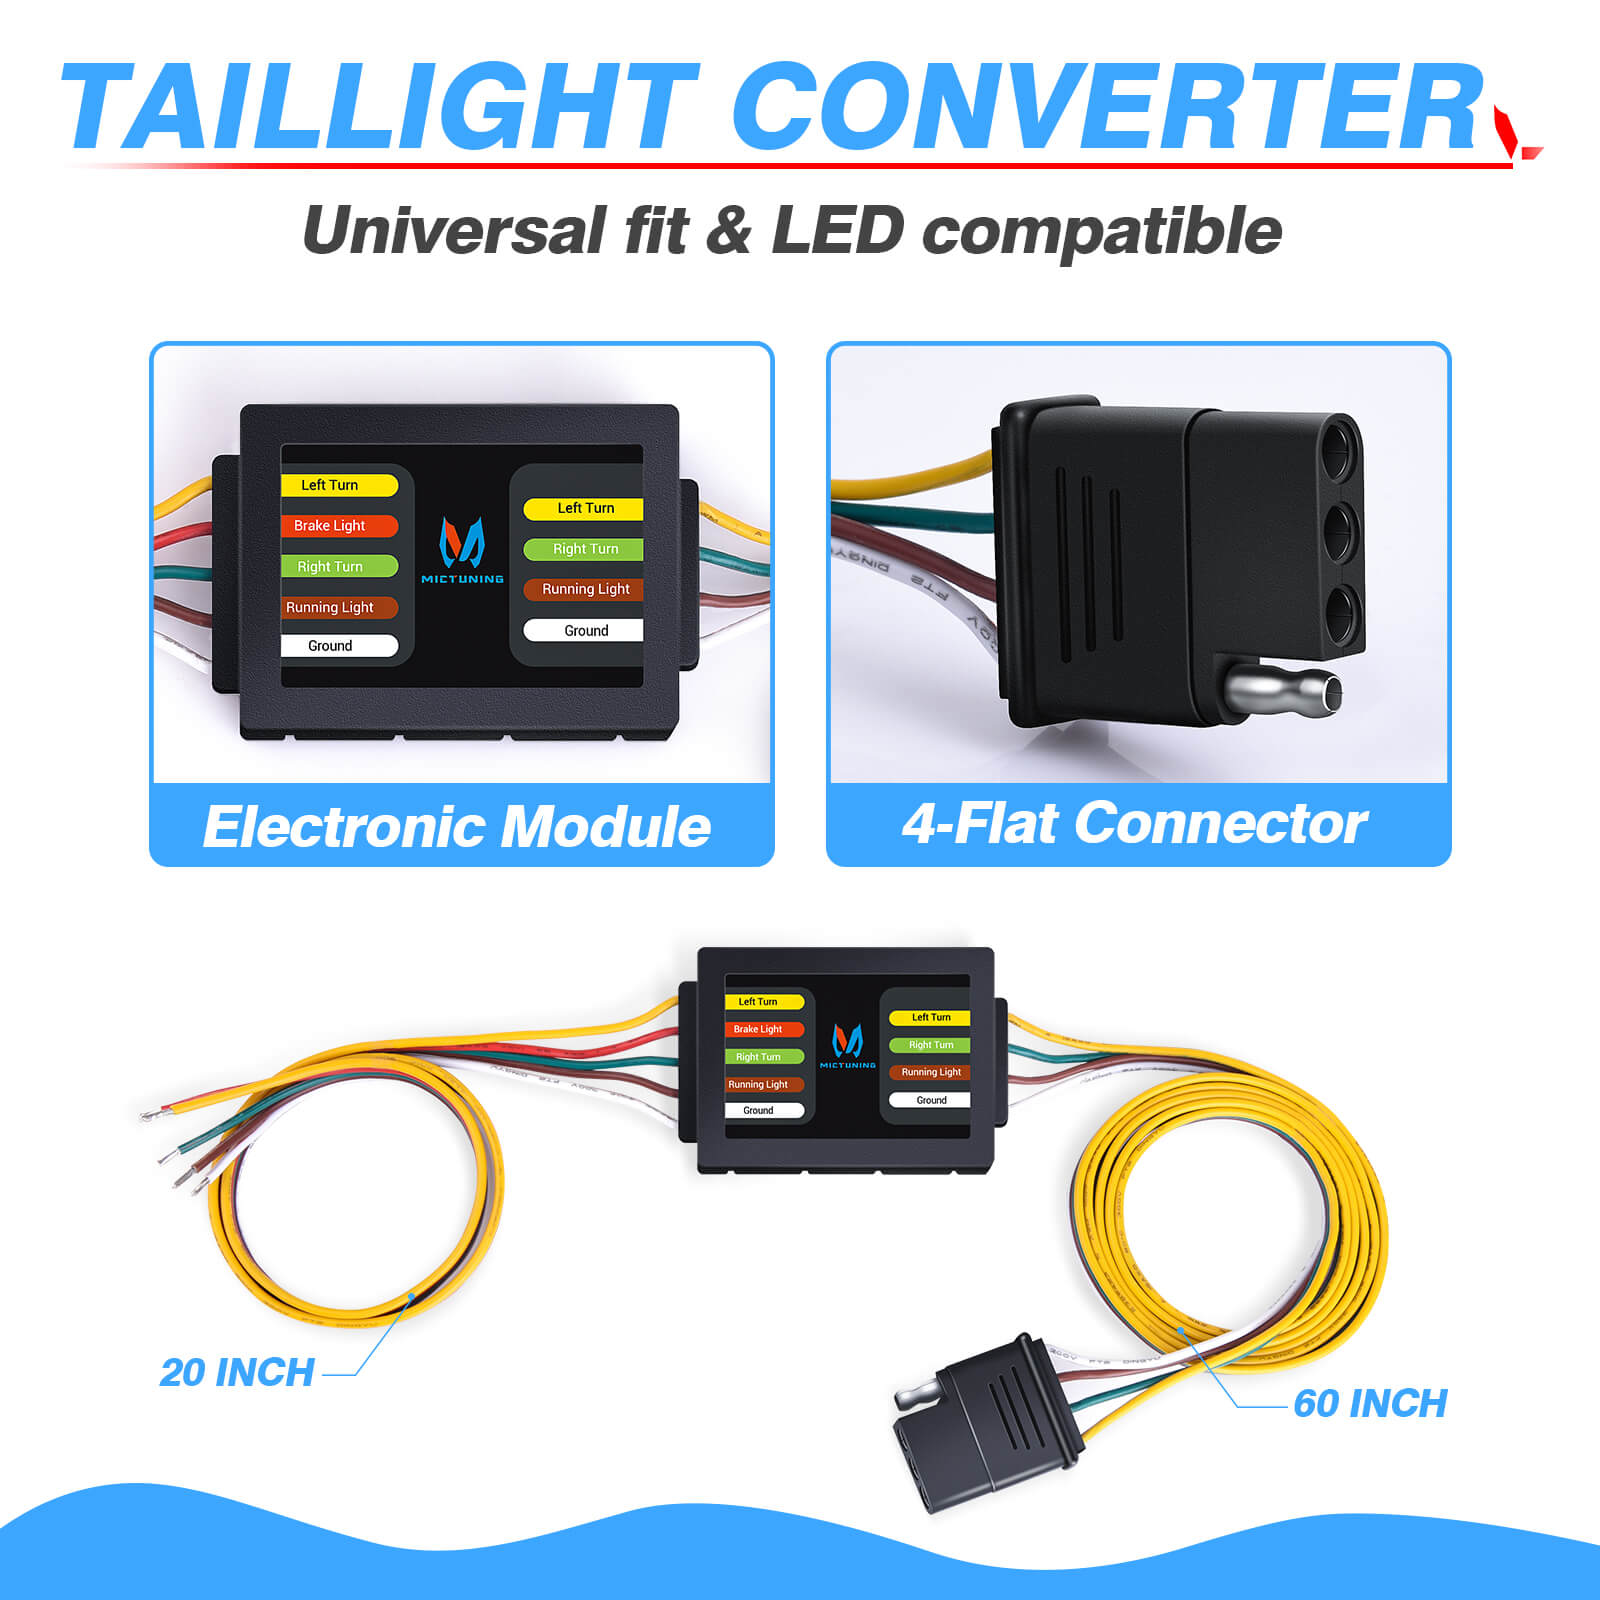 3-to-2-Wire Tail light Converter with 20 Inch Leads and 60 Inch 4-Way Flat Extension Vehicle End Connector, Universal Fit, LED Incandescent Bulbs Compatible